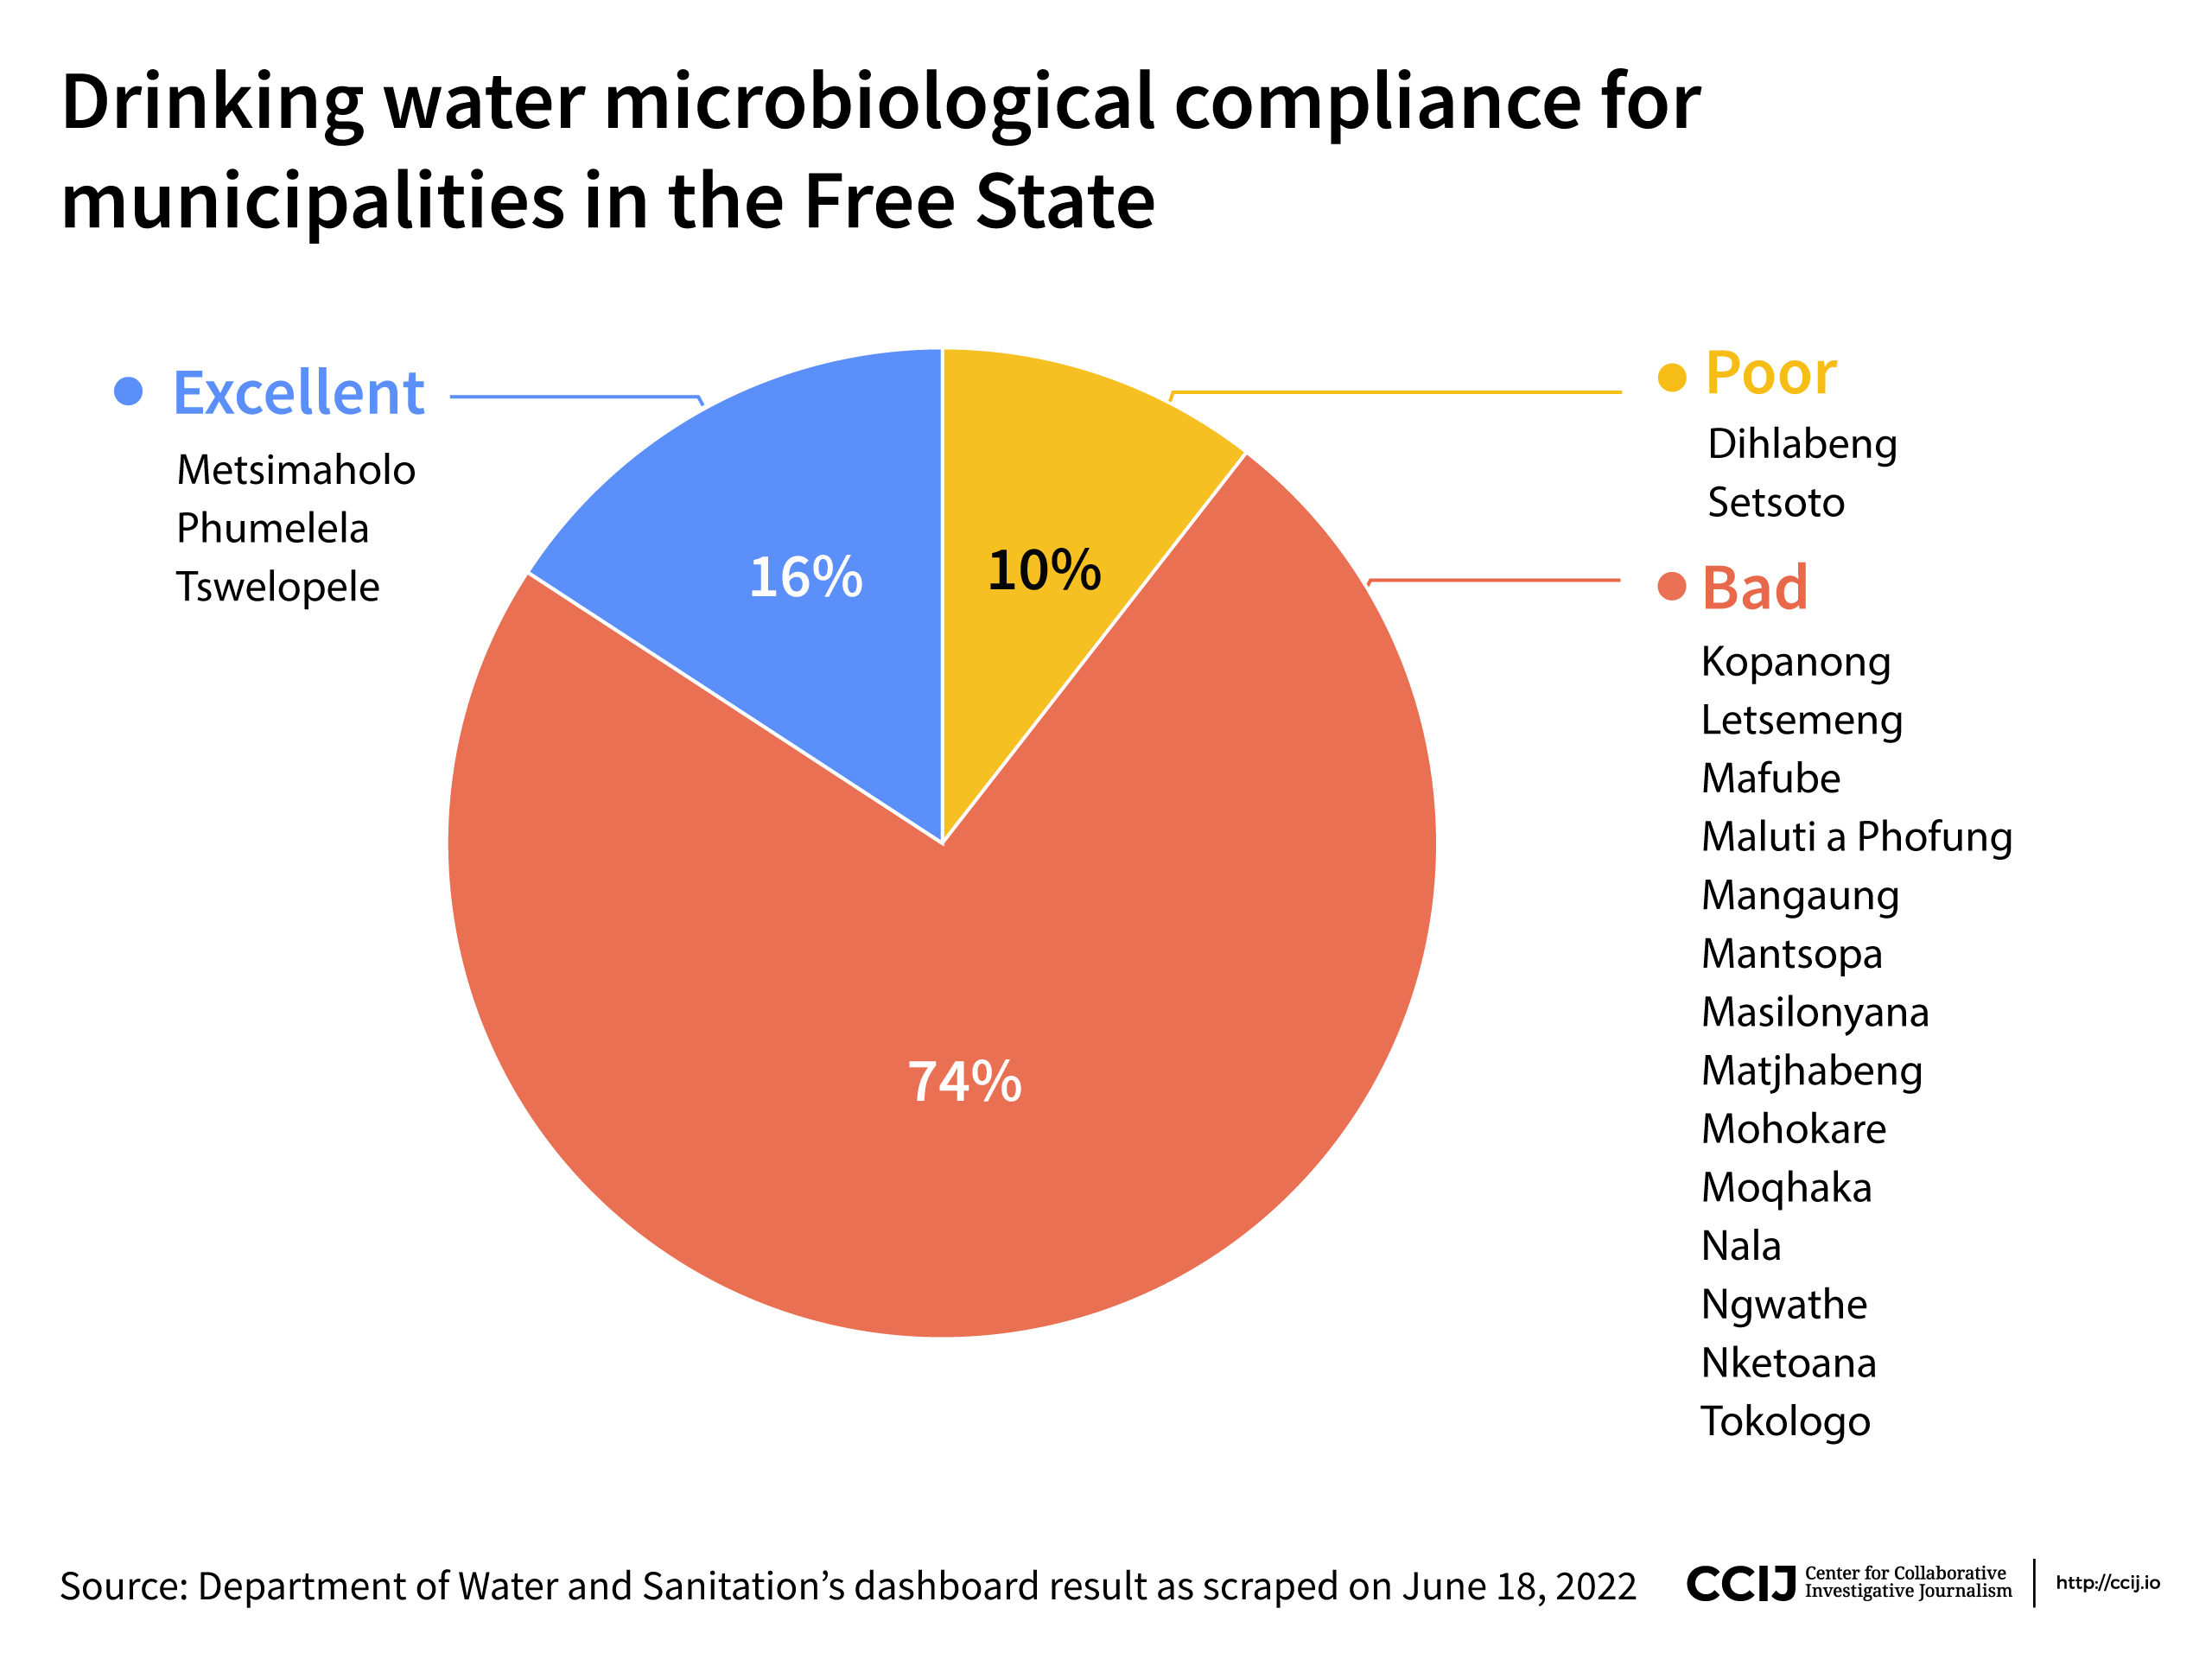 Drinking water microbiological compliance for municipalities in Free State